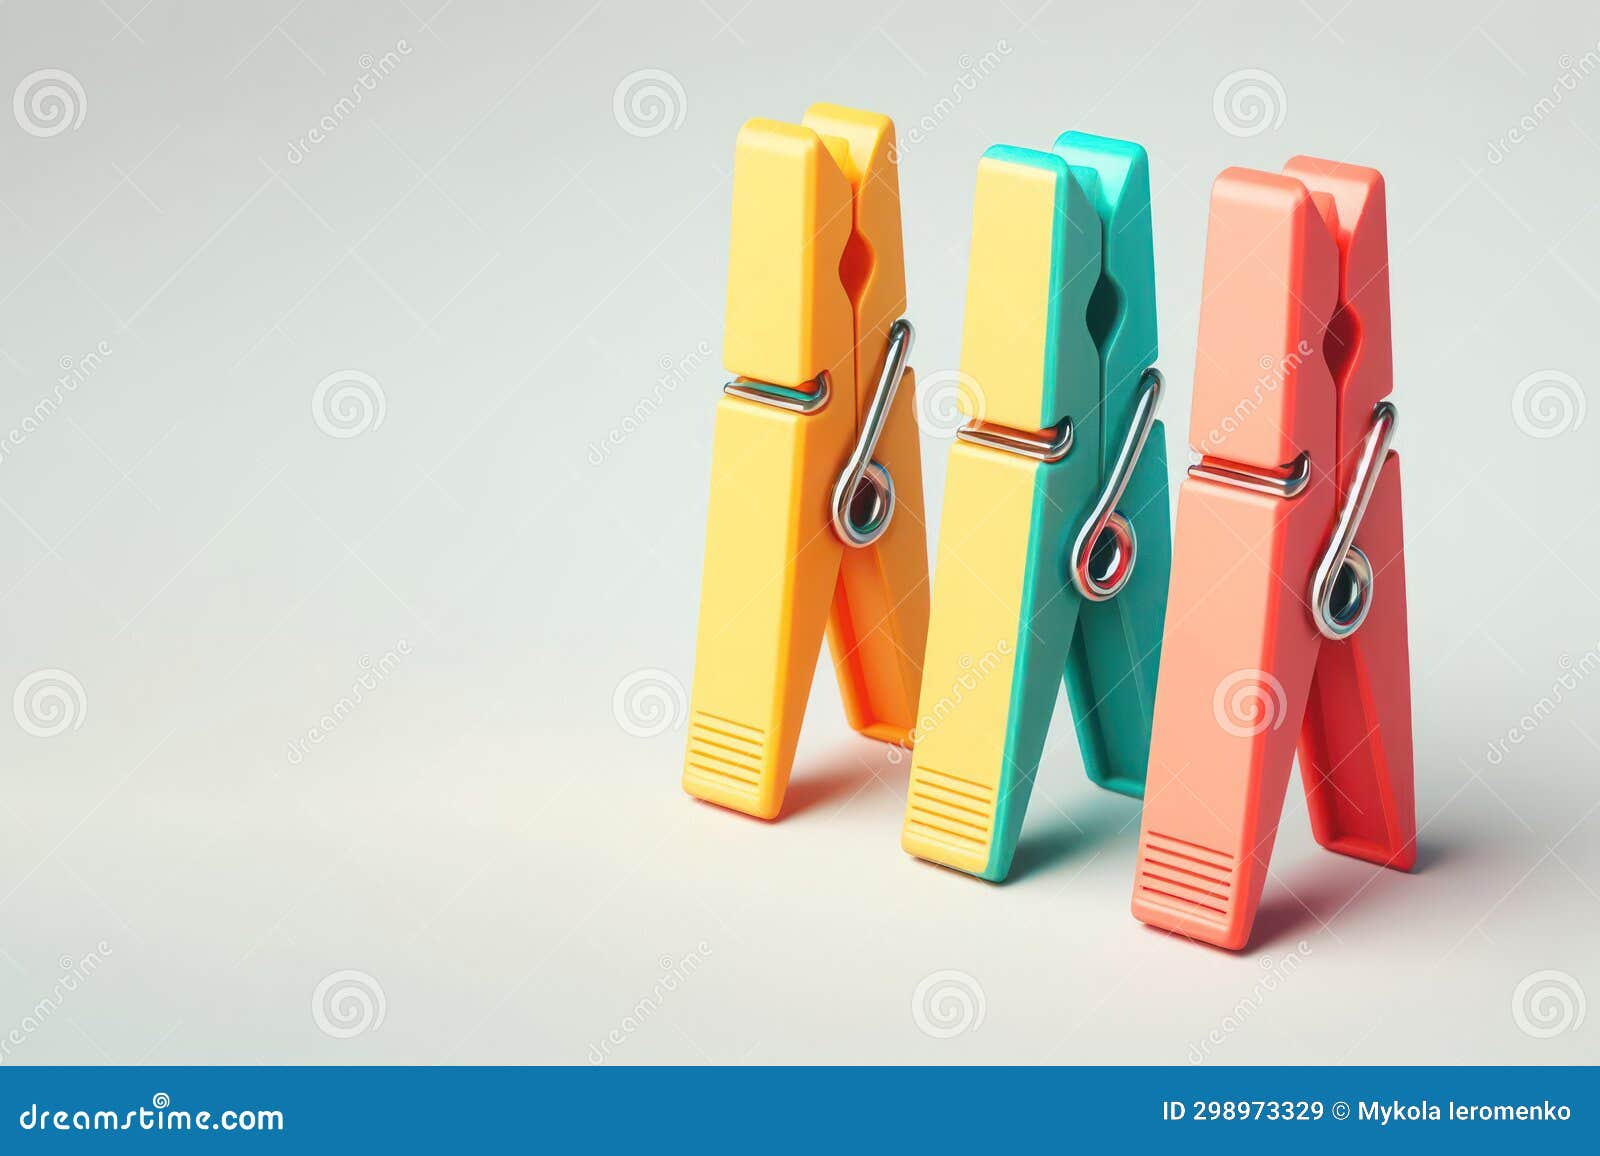 Small Clothespins of different colors close-up as a texture and